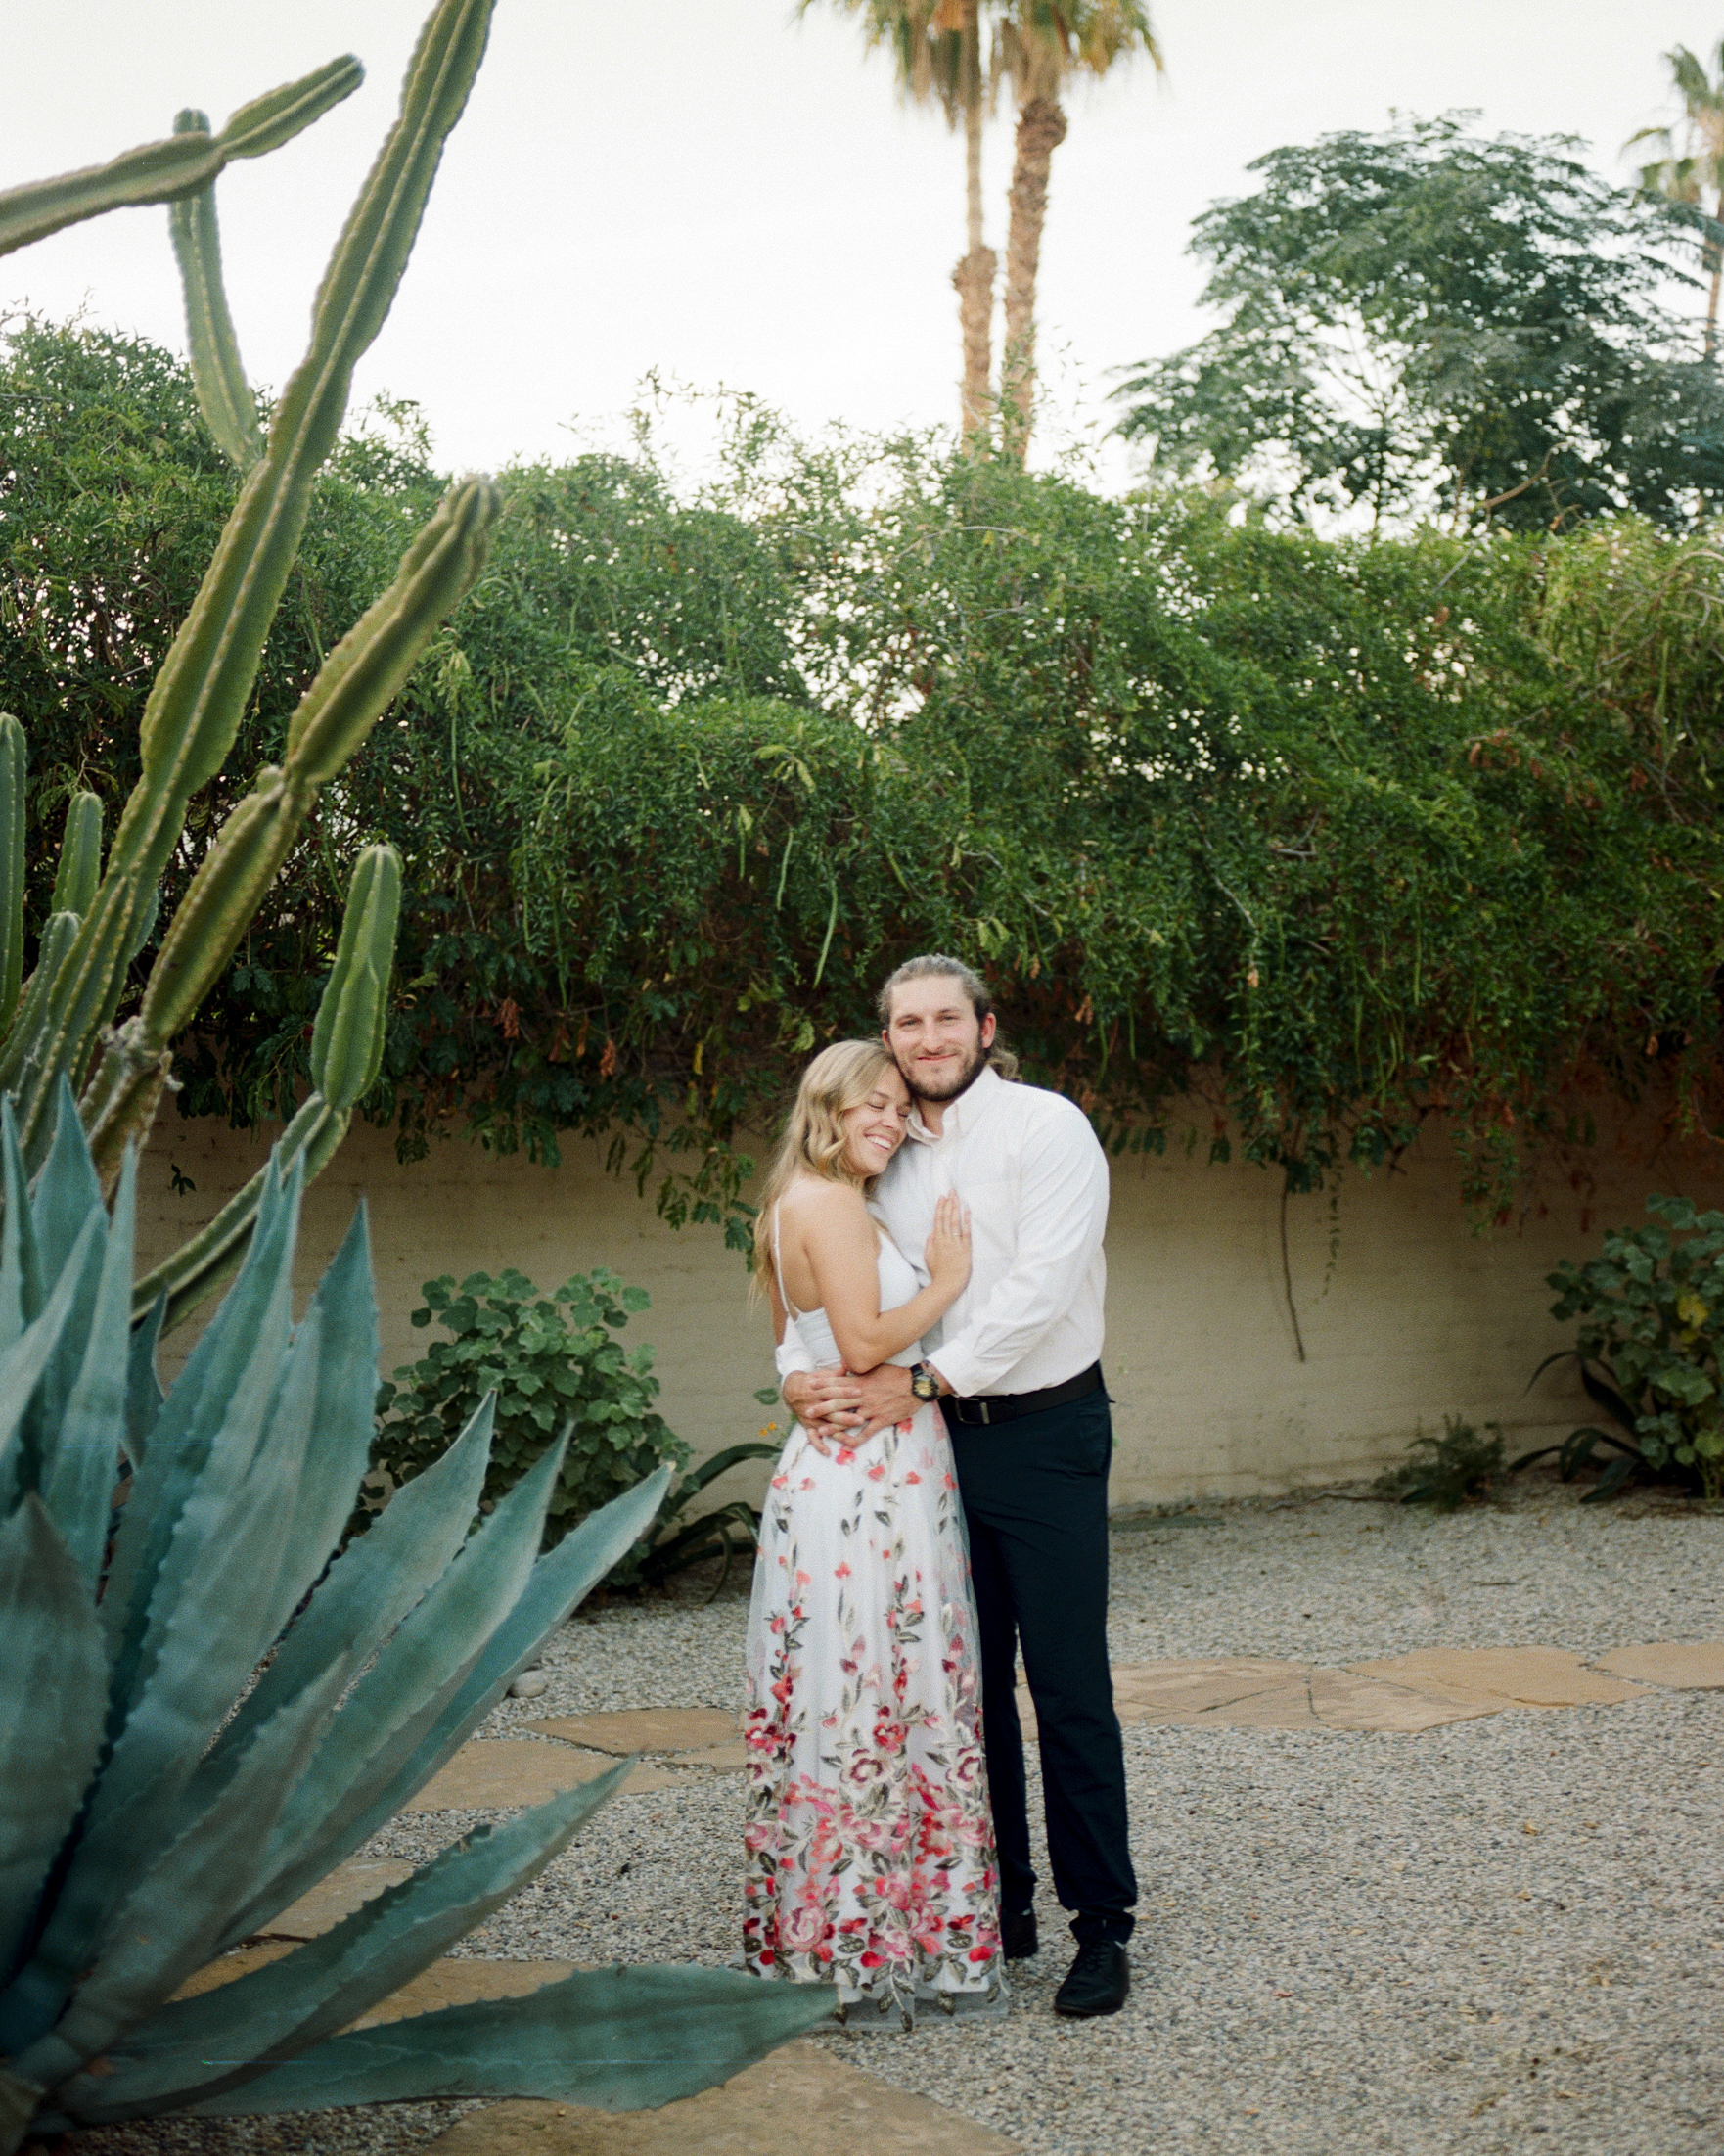 Engagement photography at Casa Cody in Palm Springs, California